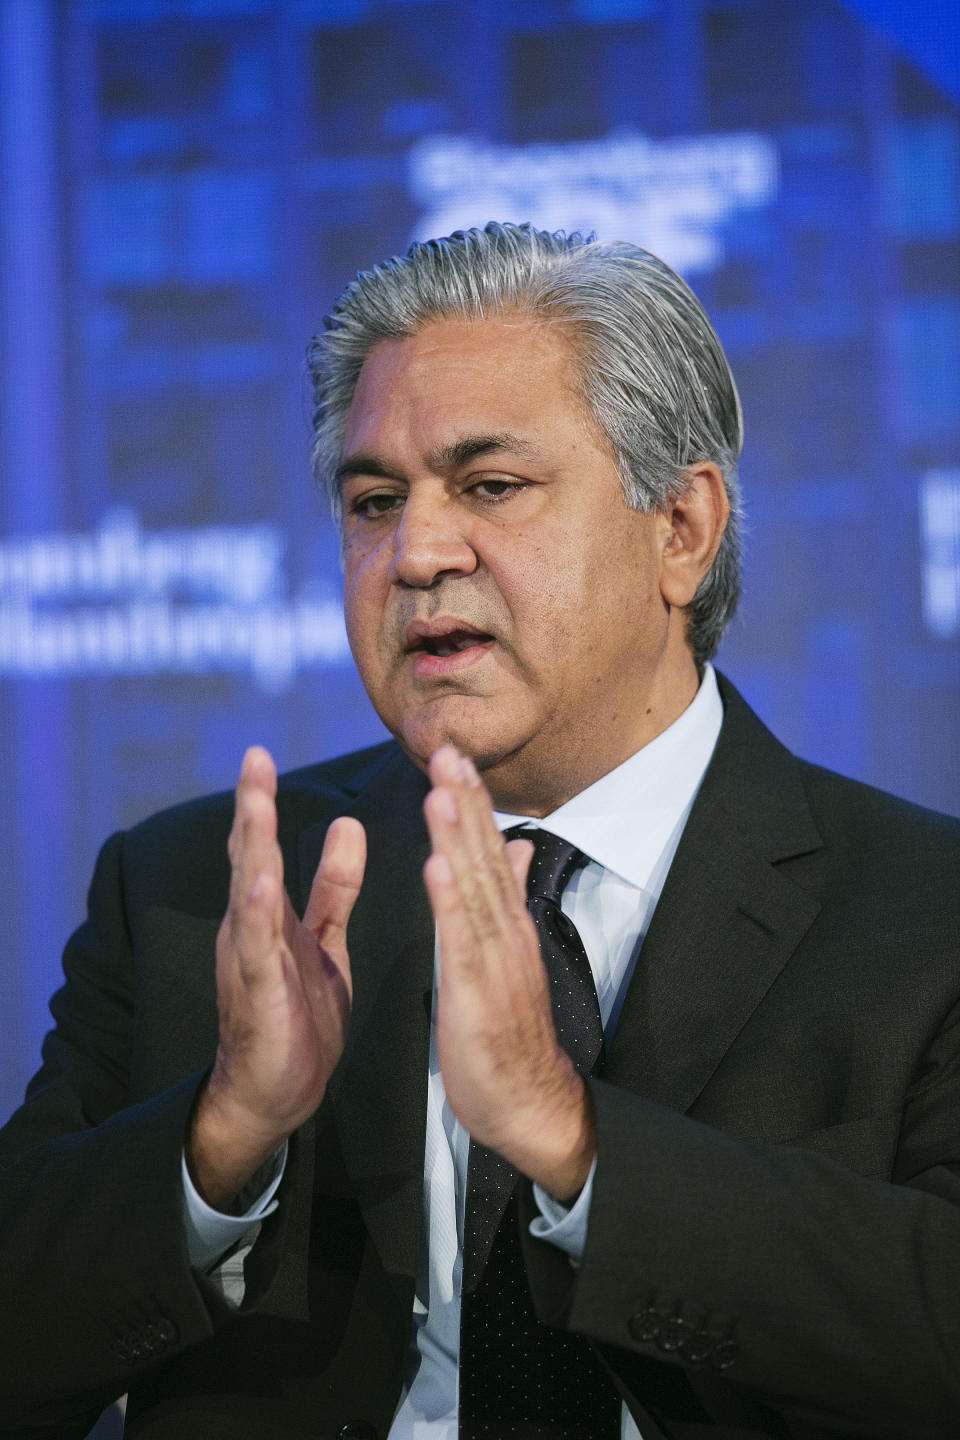 FILE - Arif Naqvi, the founder and CEO of the Abraaj Group, speaks at the Bloomberg Global Business Forum, Sept. 20, 2017, in New York. A regulatory body in Dubai said Thursday, Jan. 27, 2022, it is fining the Pakistani-born founder of Abraaj Group, the now defunct Mideast private equity firm accused of fraud, a staggering penalty of $135.5 million. (AP Photo/Mark Lennihan, File)